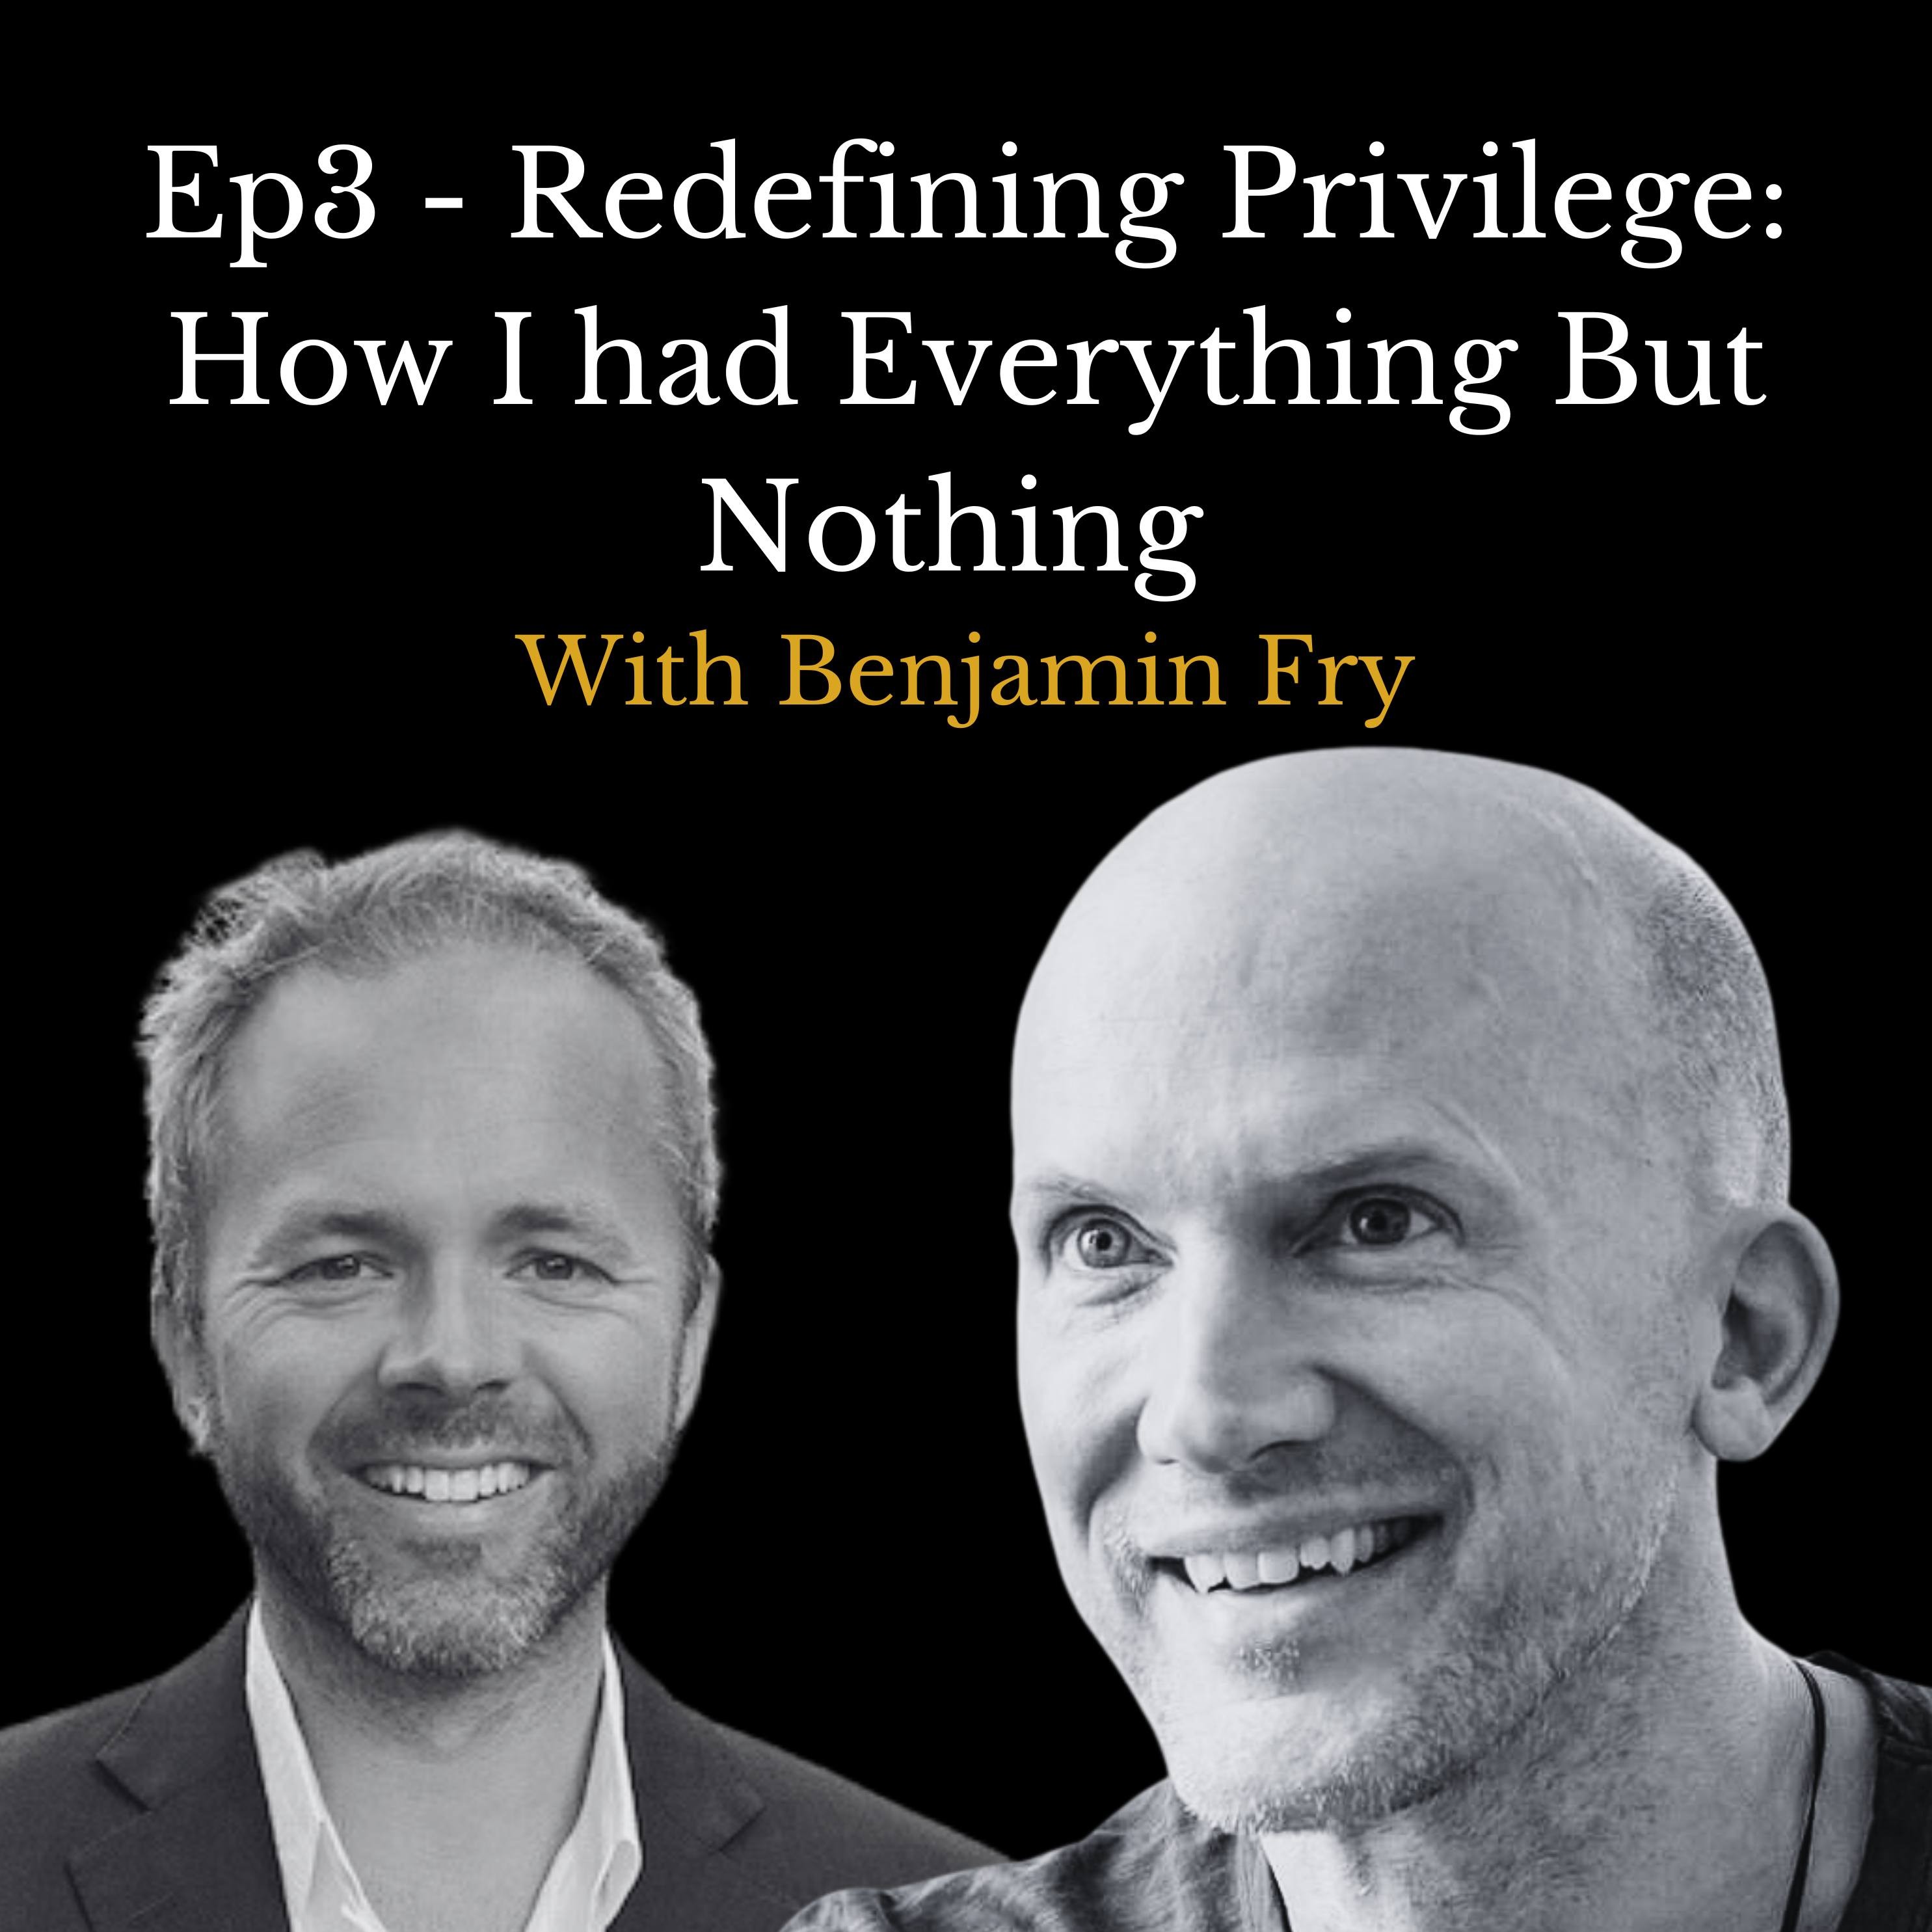 Artwork for podcast The Privileged Man Podcast